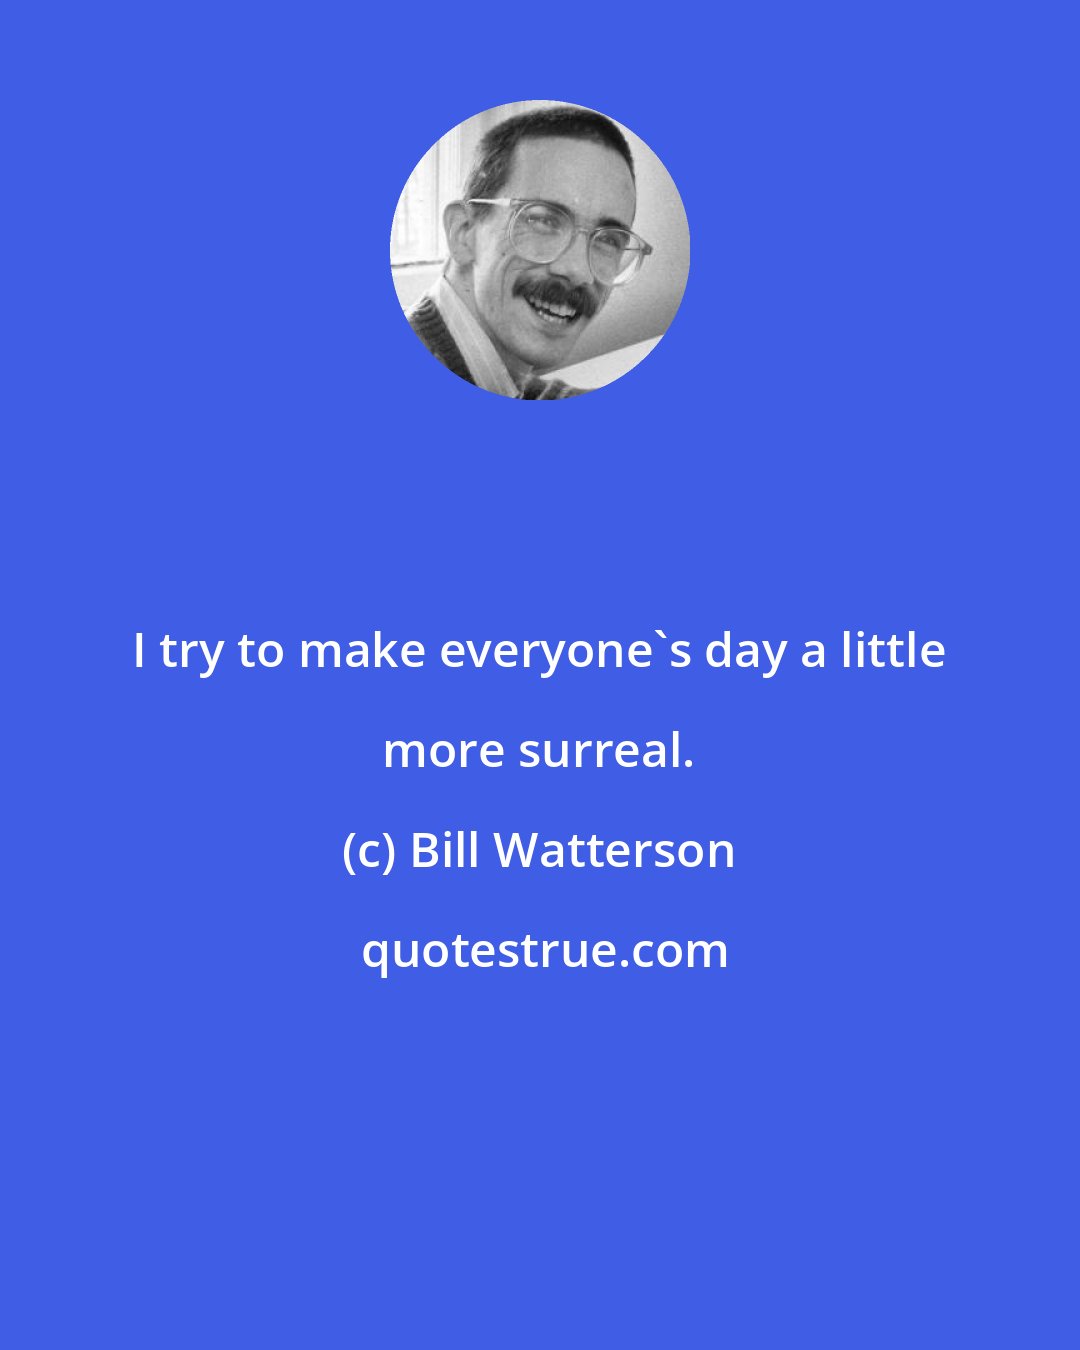 Bill Watterson: I try to make everyone's day a little more surreal.